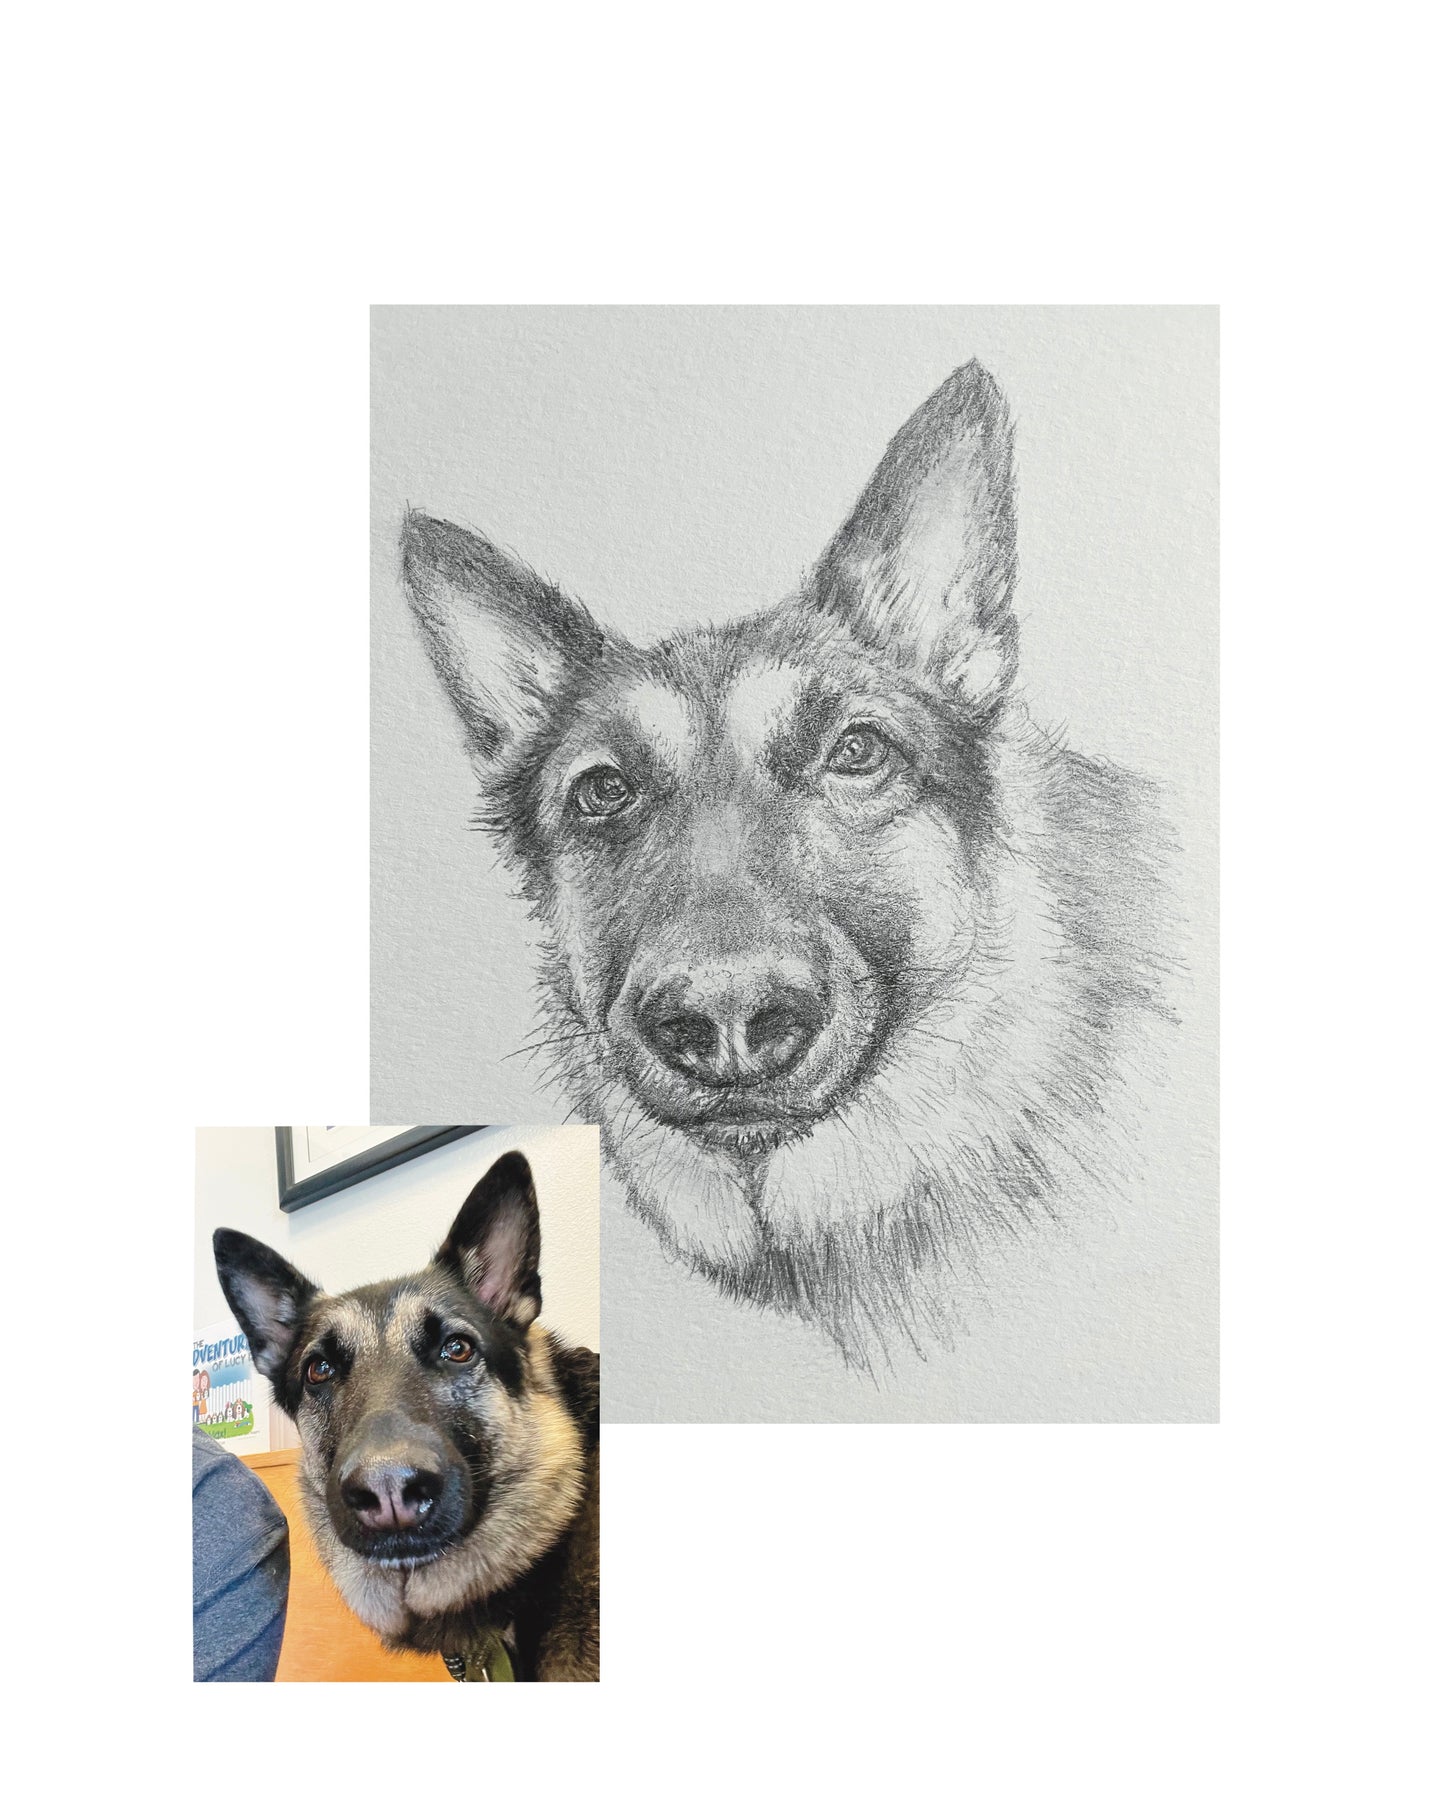 Commission Hand Drawn Pencil Art/Drawing